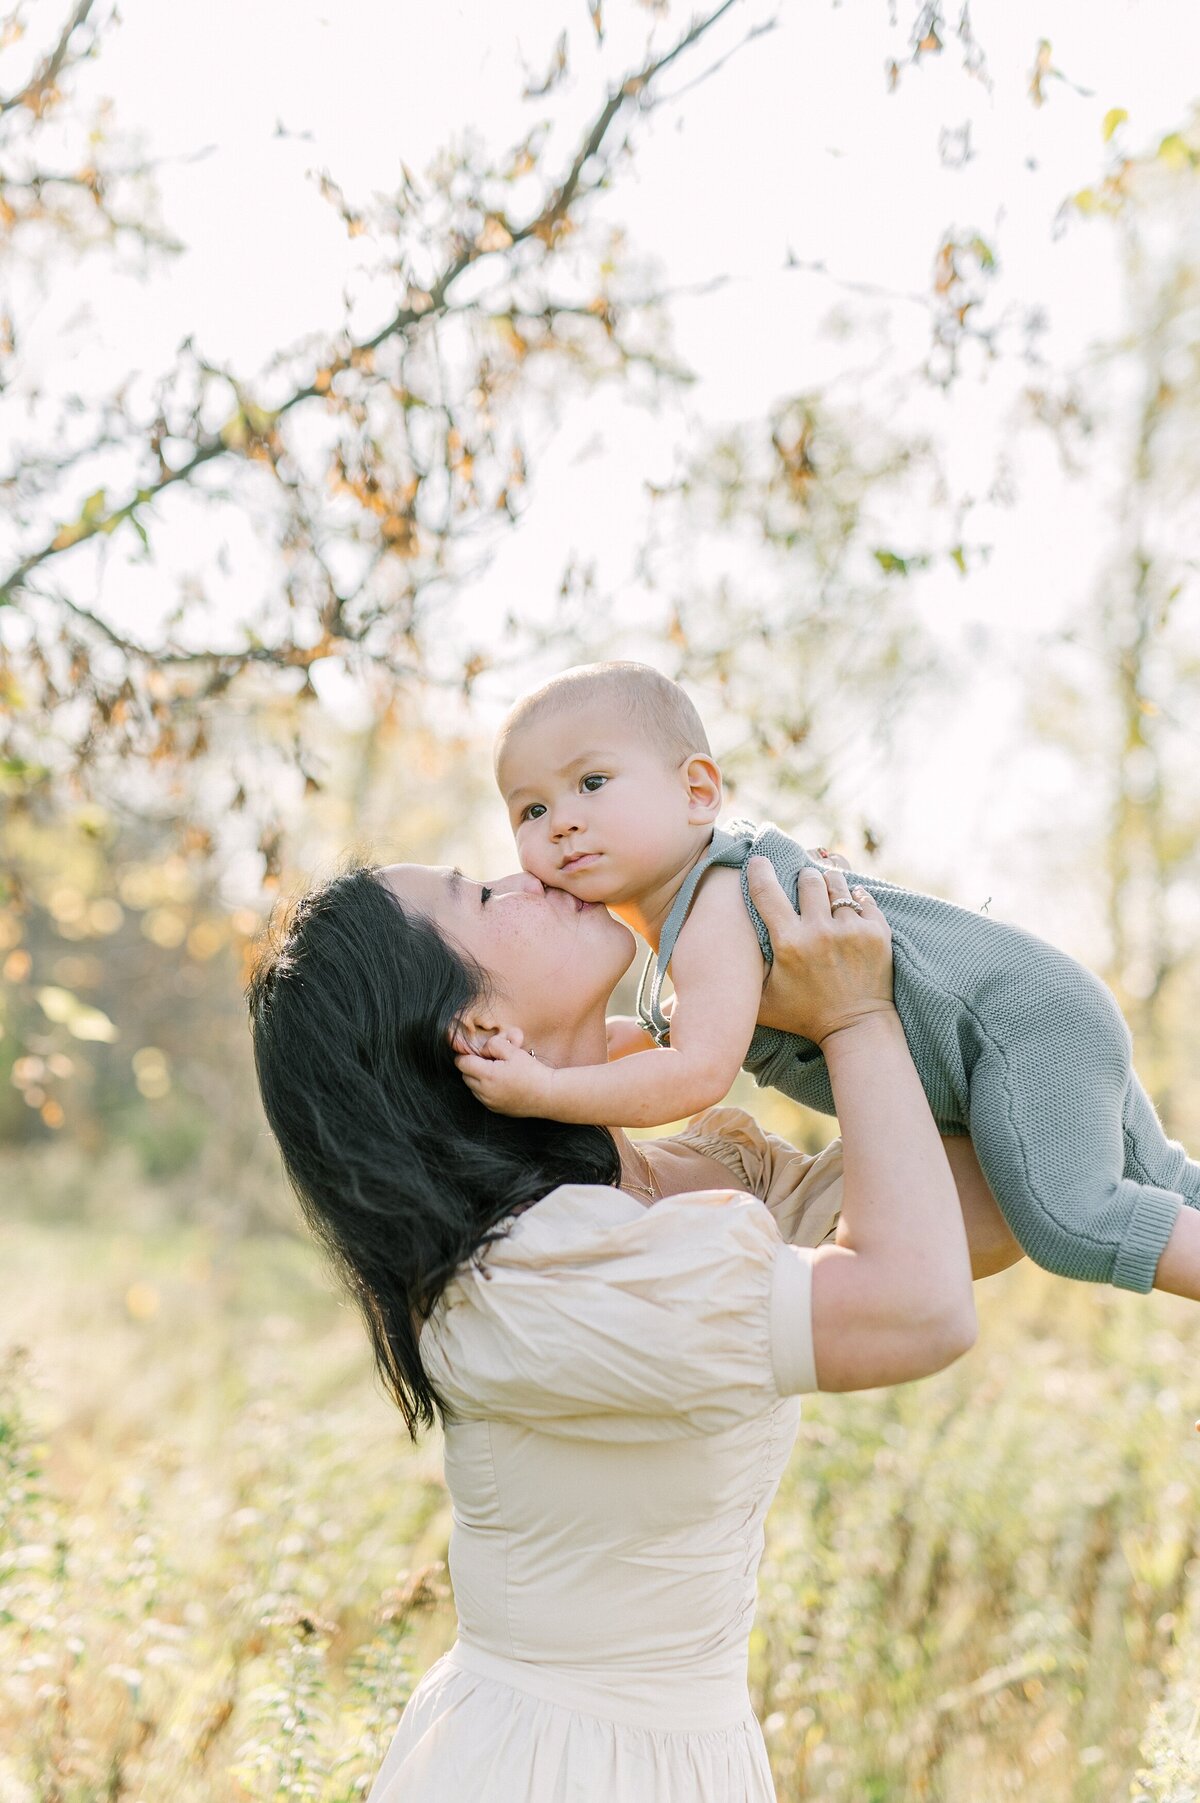 mom lifting her one year old son in the air